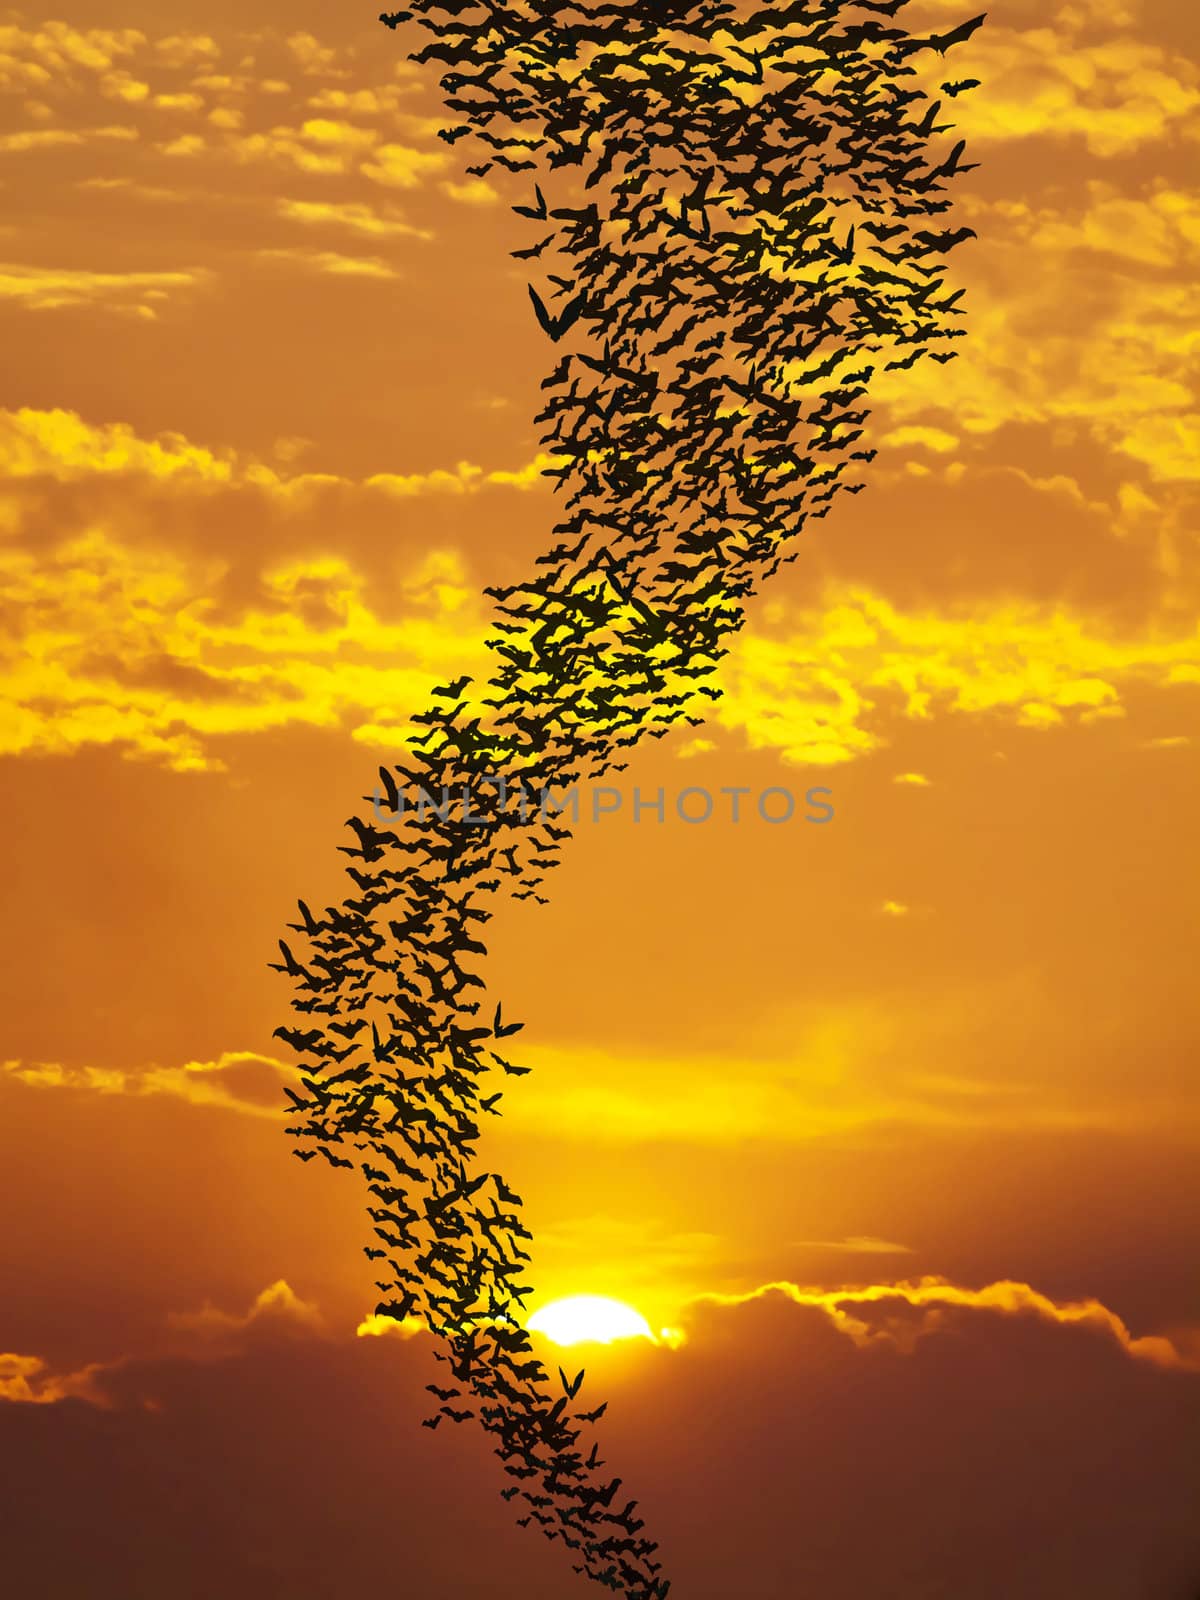 Bats flying againt sun and golden sky may use for horrible theme or halloween theme